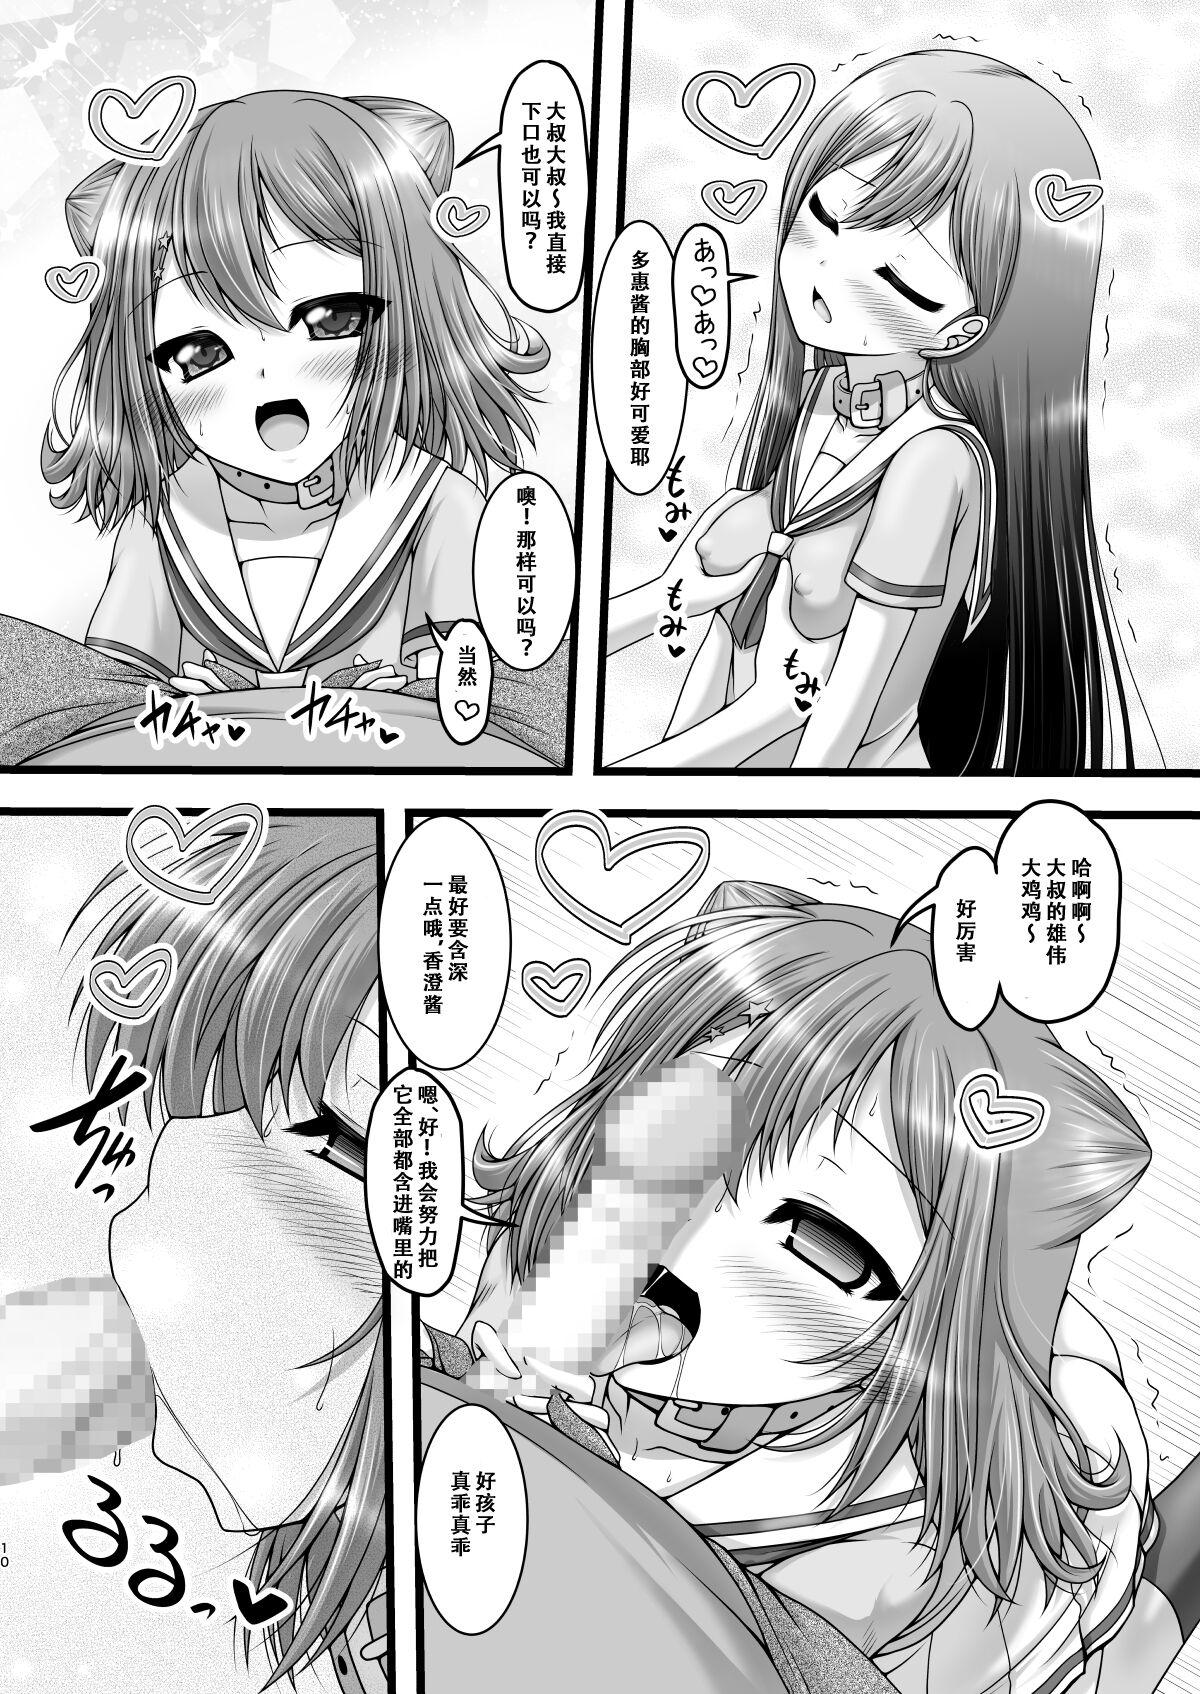 Ffm Twinkle Express - Bang dream Clothed Sex - Page 10